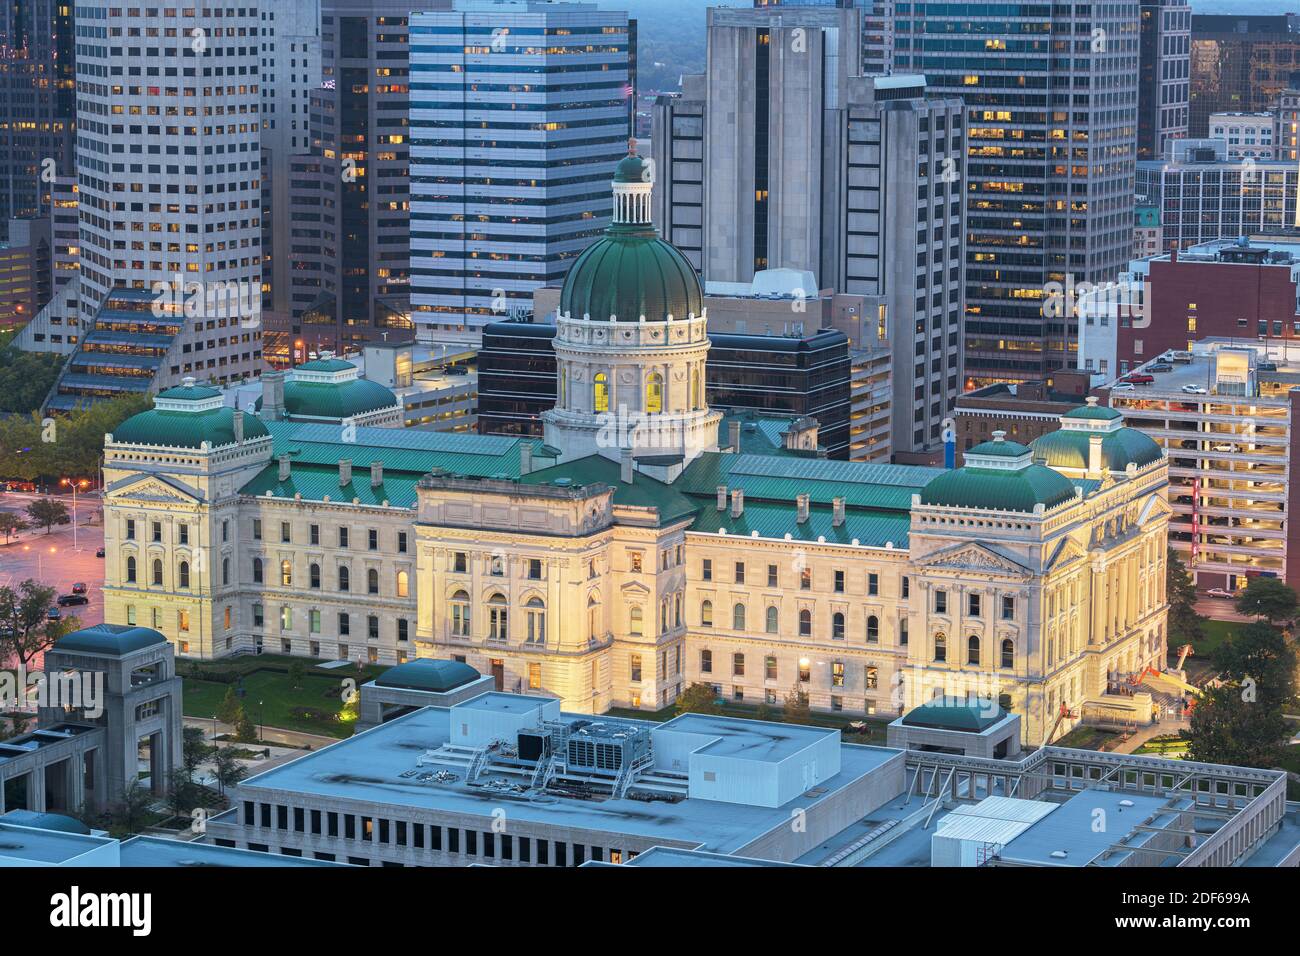 Indiana State Capitol Building in Indianapolis, Indiana, USA. Stockfoto